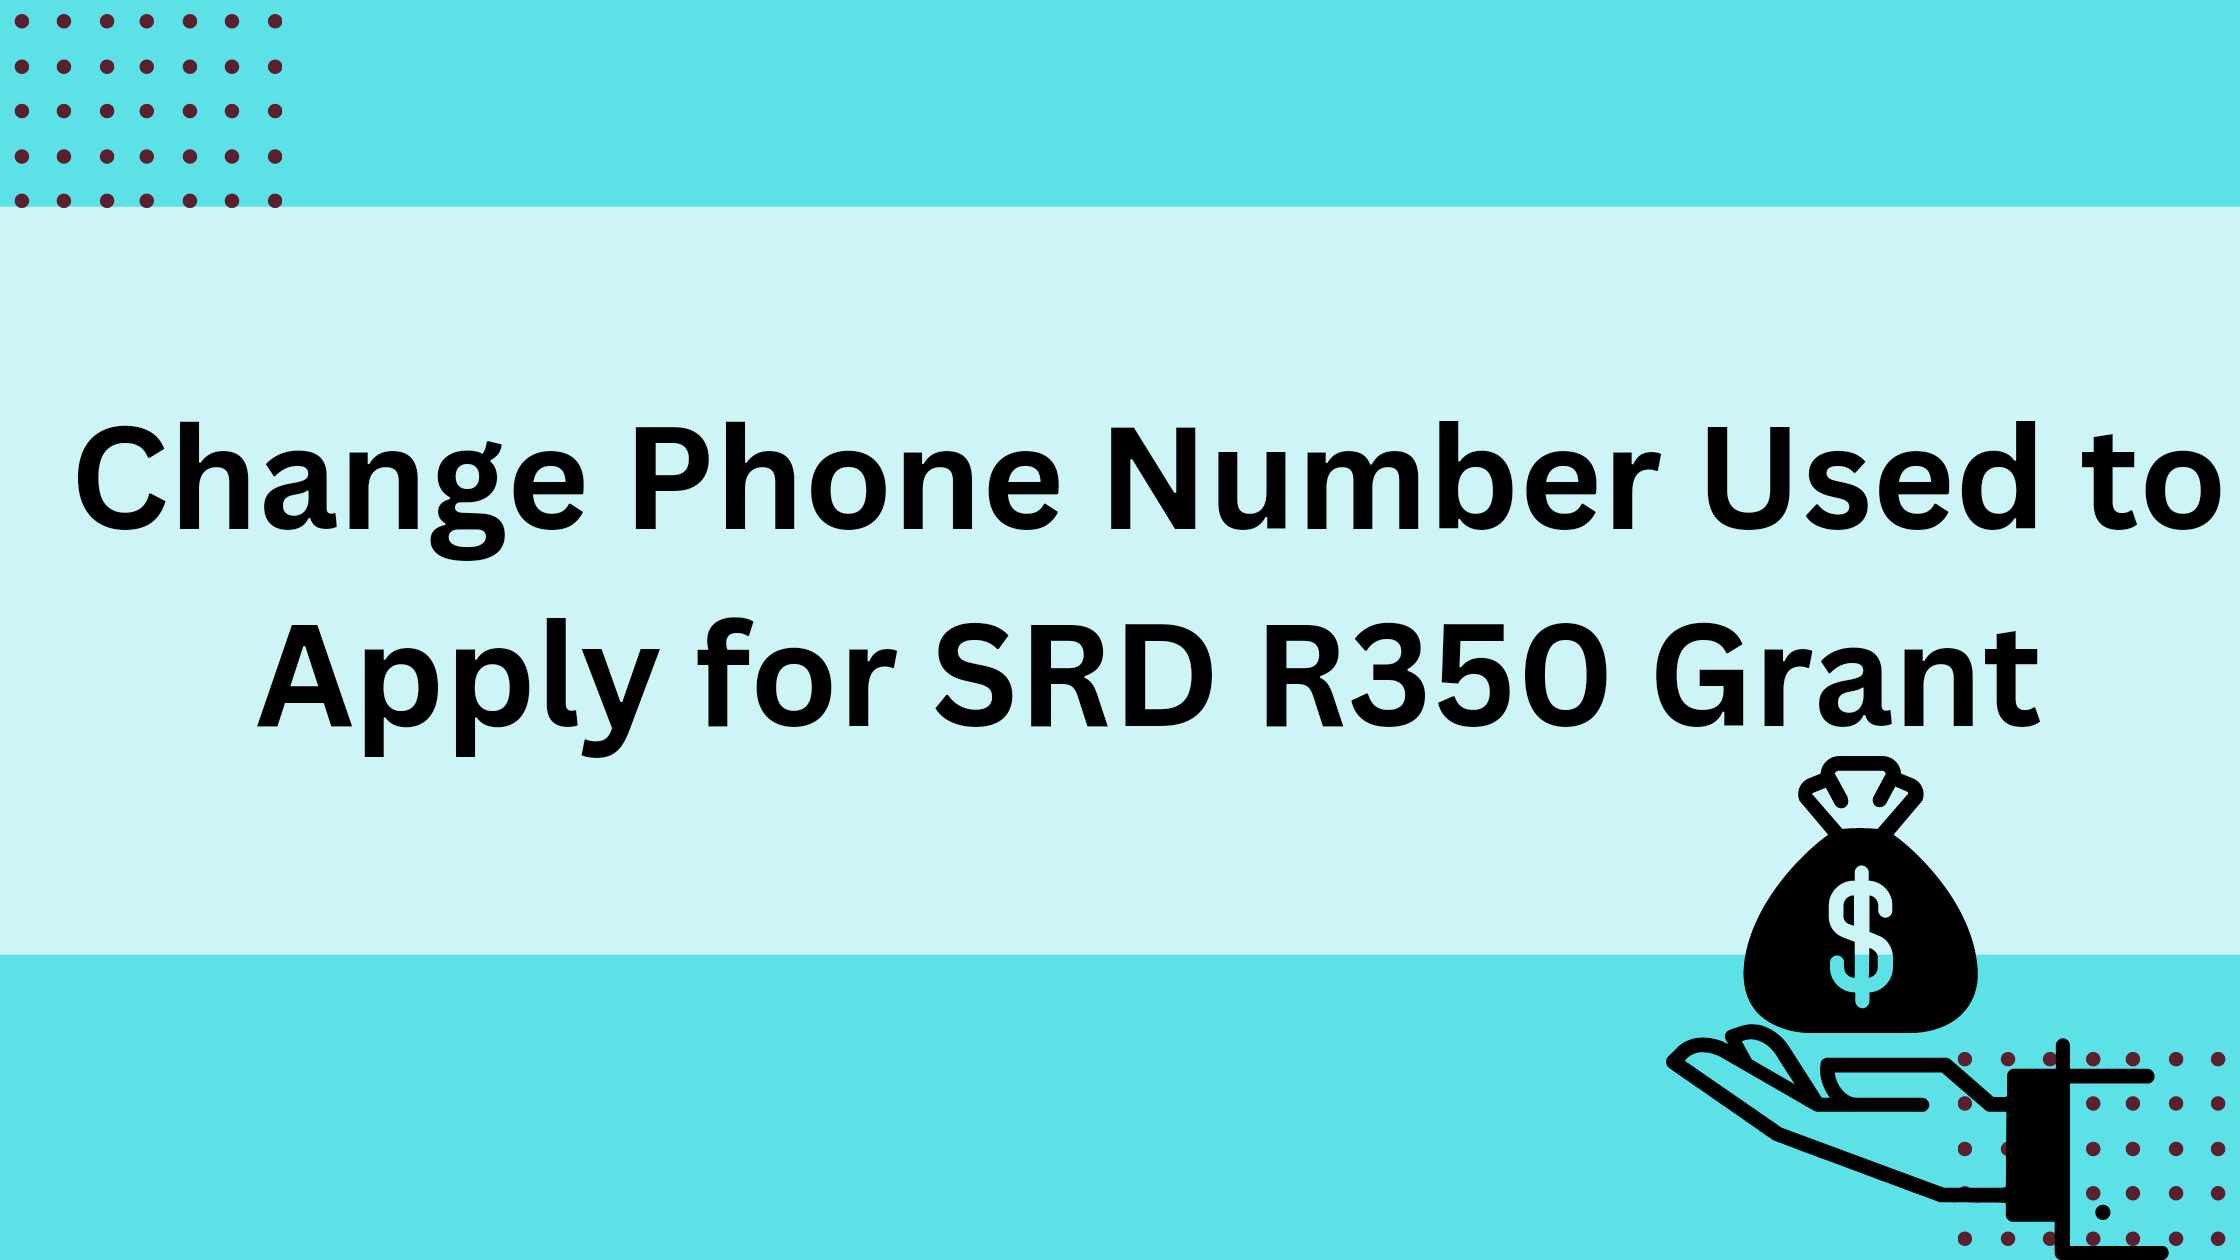 Change Phone Number Used to Apply for SRD R350 Grant